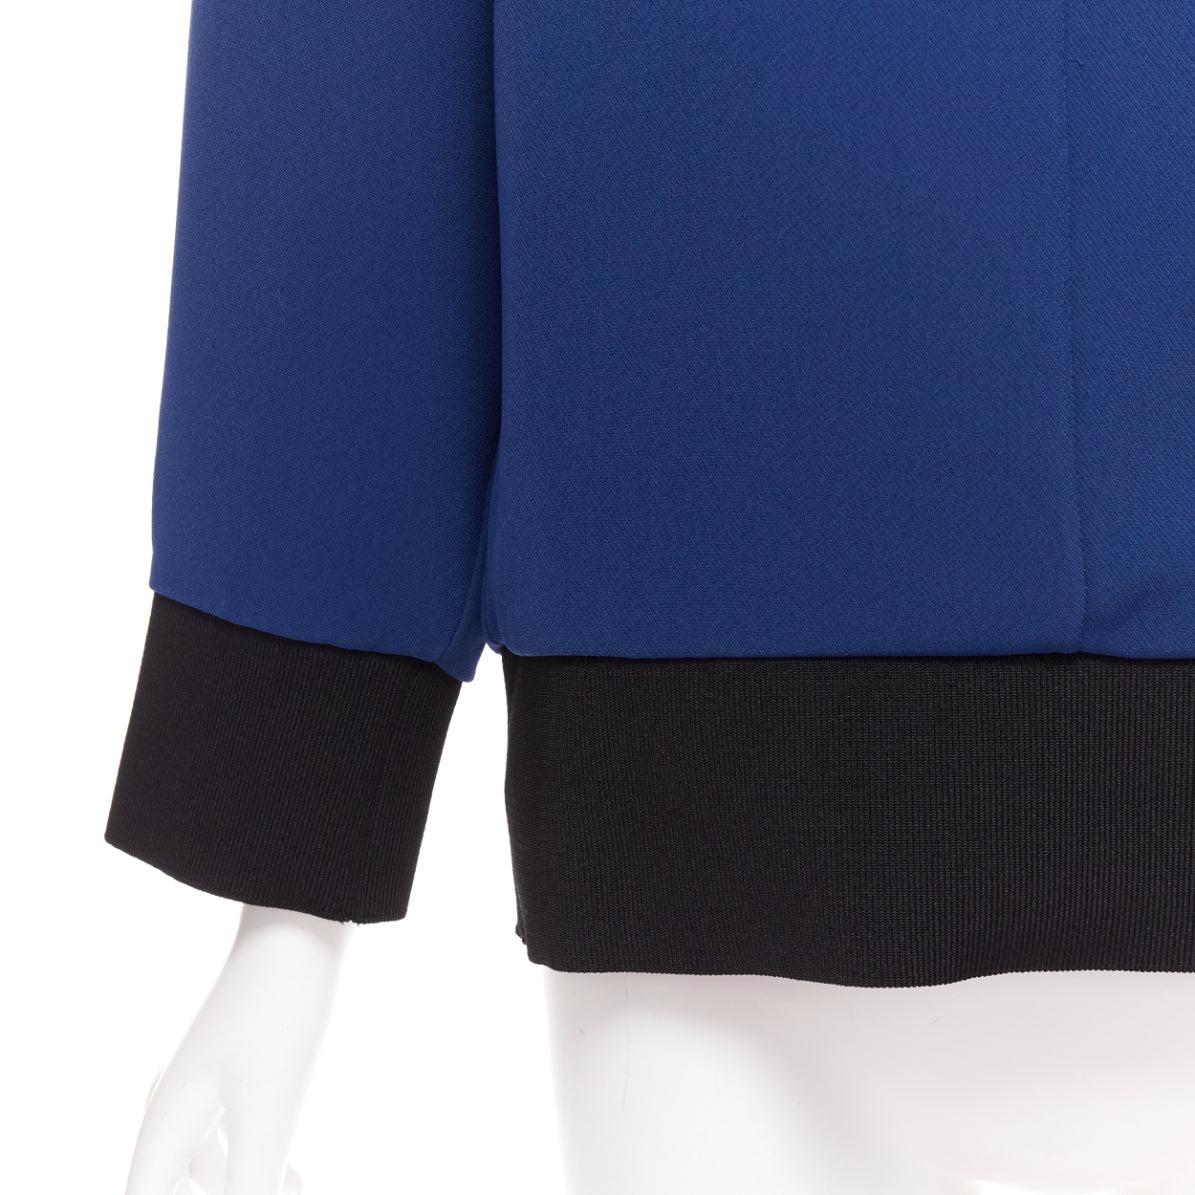 MARNI blue V neck contrast ribbing long sleeve boxy cocoon top IT36 XS
Reference: CELG/A00314
Brand: Marni
Material: Acetate, Blend
Color: Blue, Navy
Pattern: Solid
Closure: Slip On
Extra Details: Navy rib hem and cuffs.
Made in: